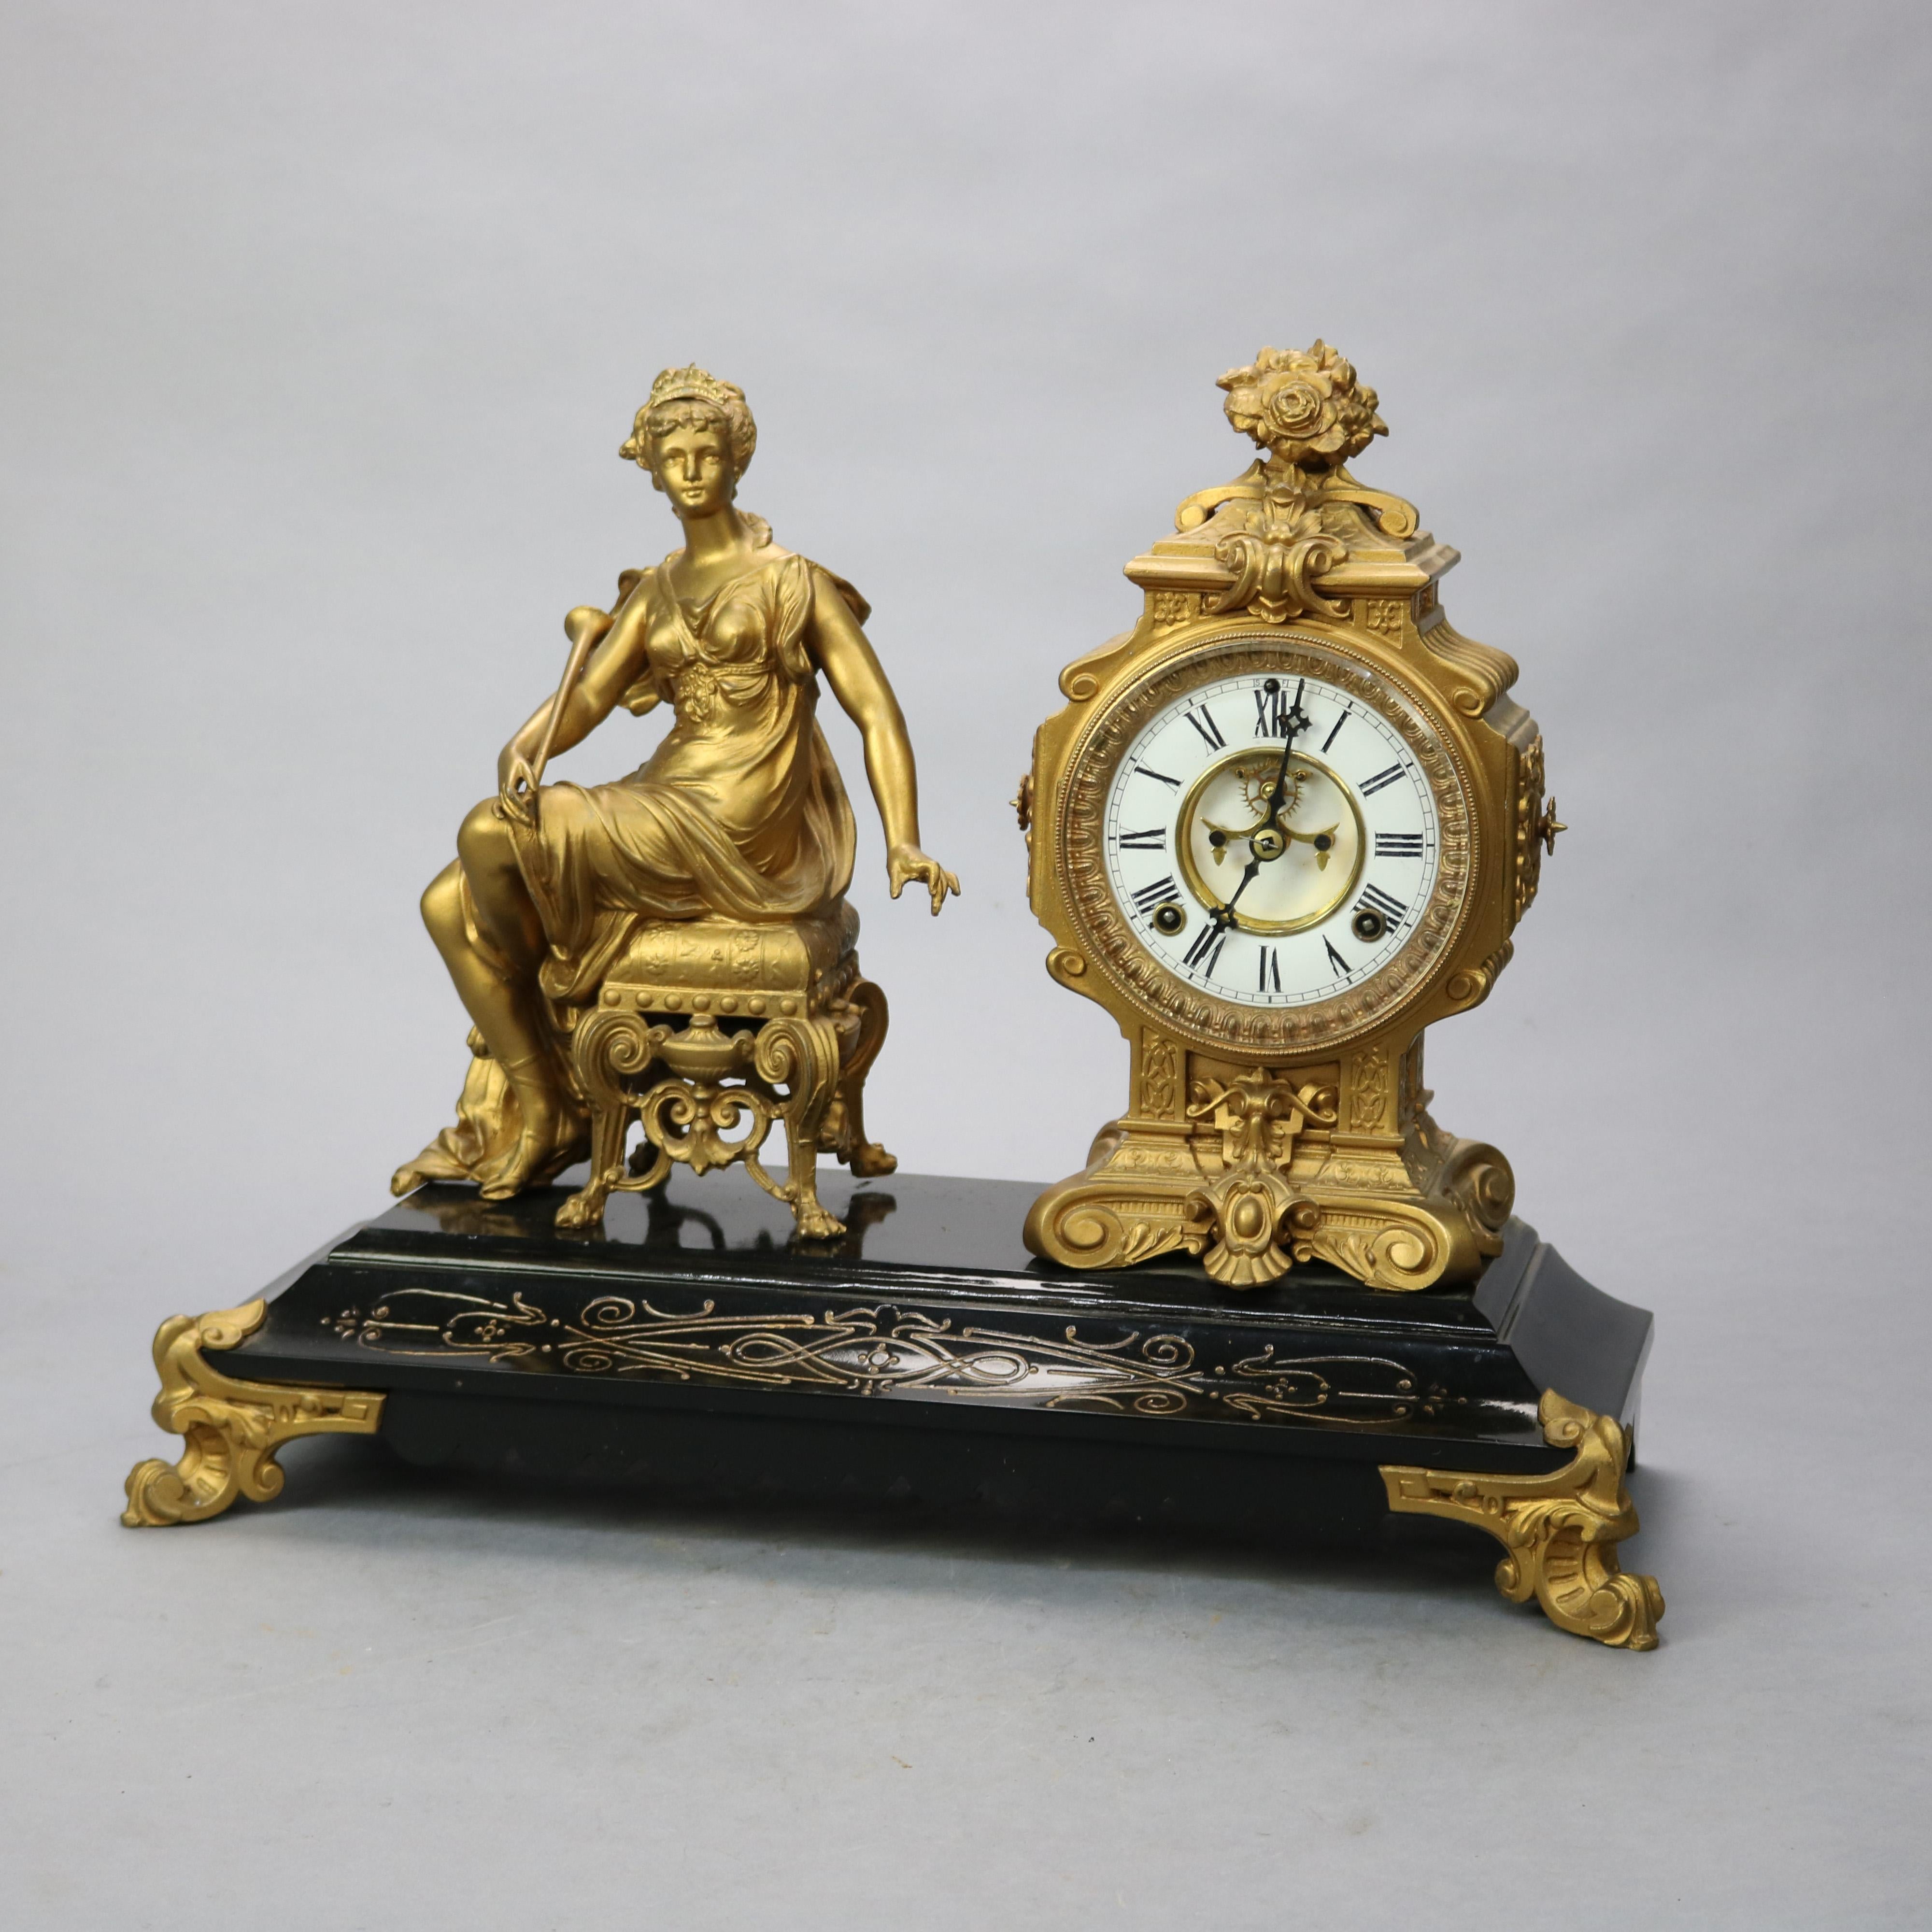 An antique figural mantel clock by Ansonia offers bronzed Classical Woman seated on an ornate stool and holding a horn beside a clock having a panier de fleur finial and raised on scroll feet, all seated on a slate base with incised and gilt scroll